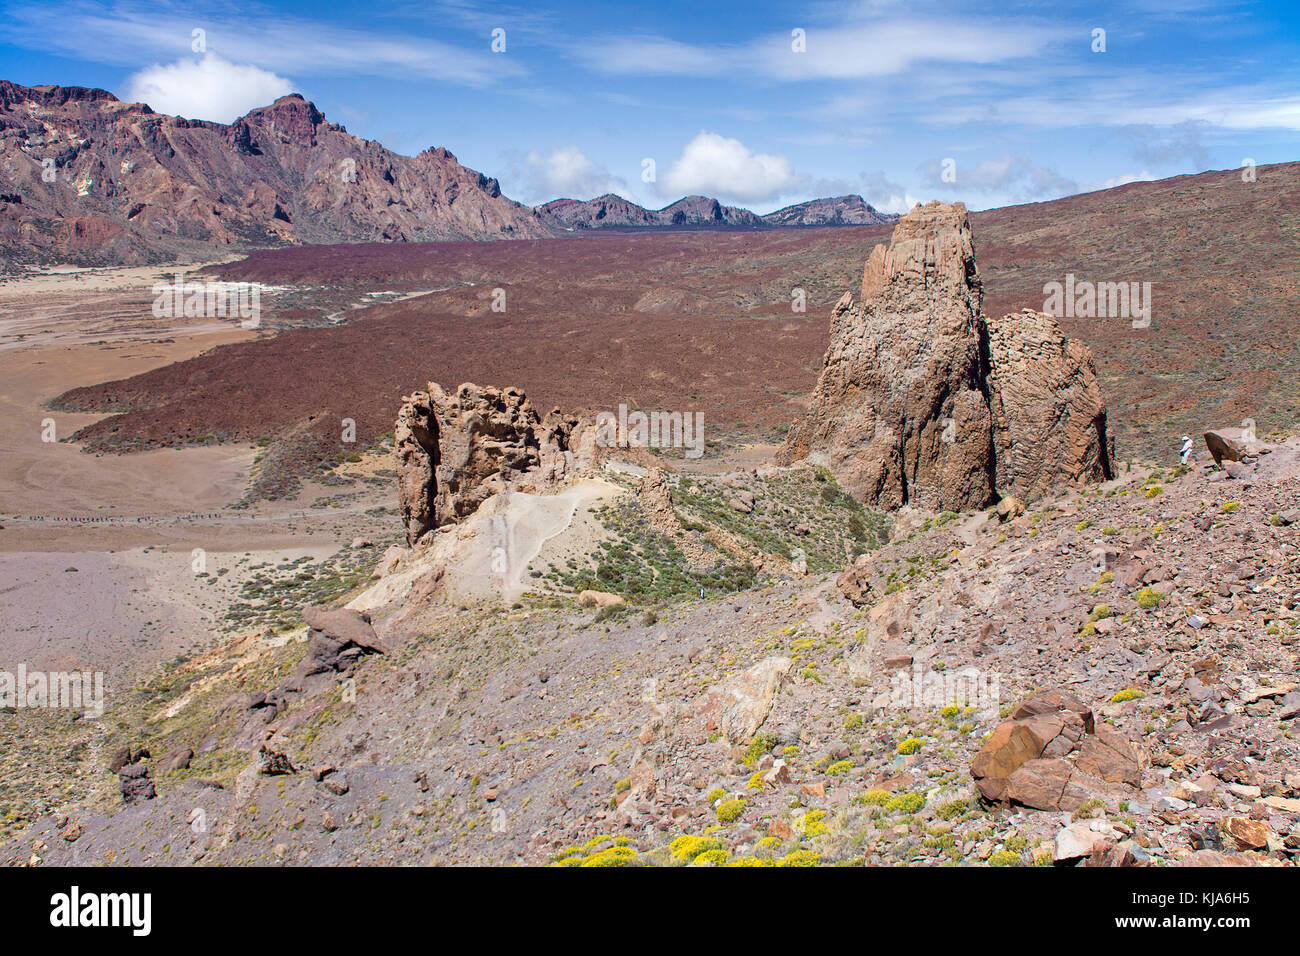 View point at Roques de Garcia, view over plain Canada, Teide Nationalpark, UNESCO world heritage site, Tenerife island, Canary islands, Spain Stock Photo